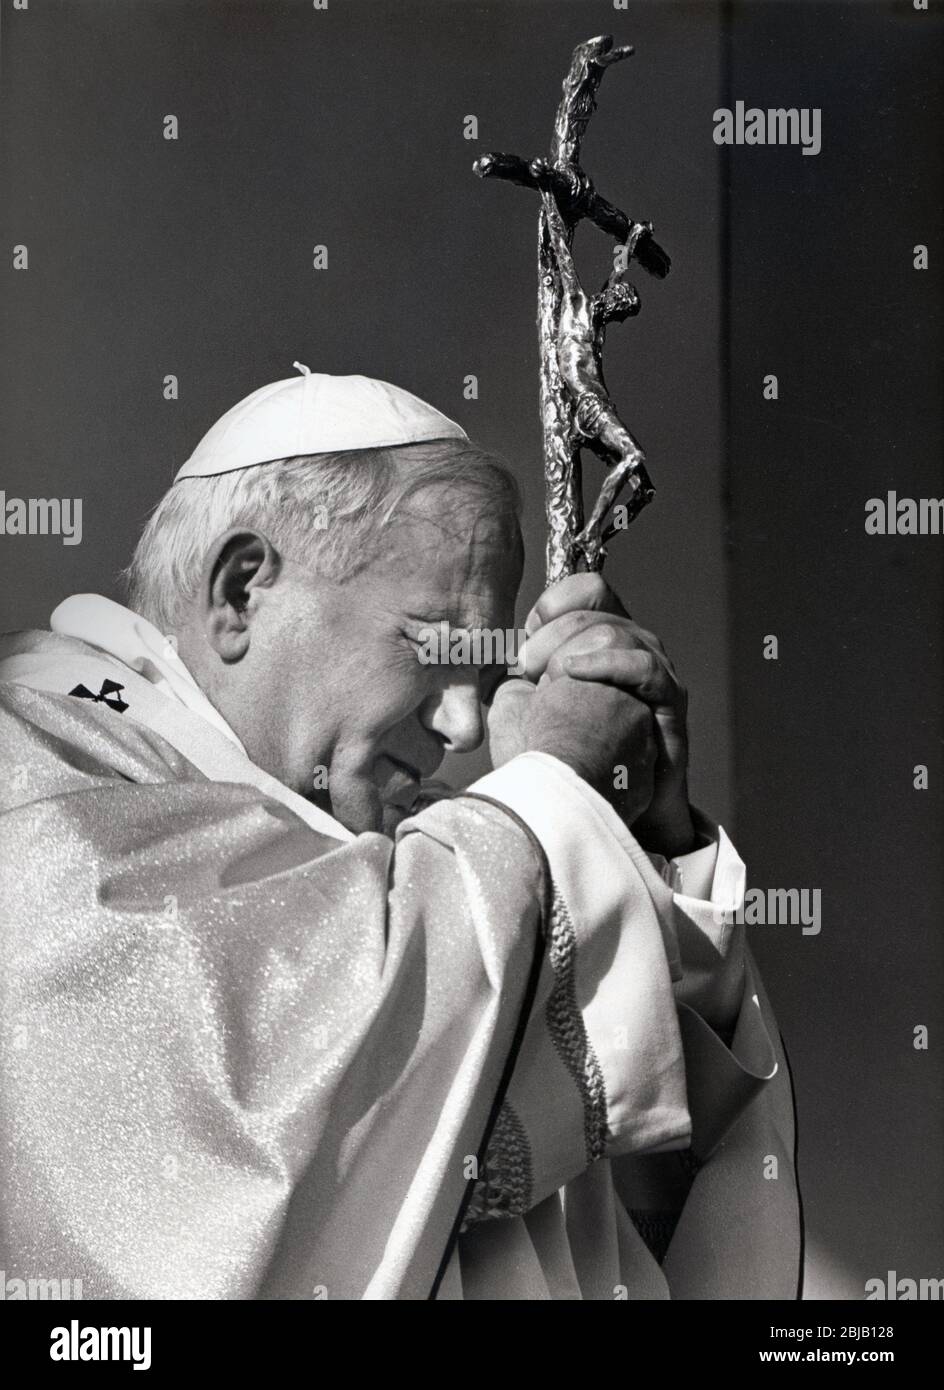 Pope John Paul II (Karol Jozef Woytila) during his first visit in November 1980 to Germany. Prayer during a mass service in Fulda  ---   Papst Johannes Paul II. (Karol Jozef Wojtyla), Deutschlandbesuch am 16.11.1980 in Fulda Stock Photo